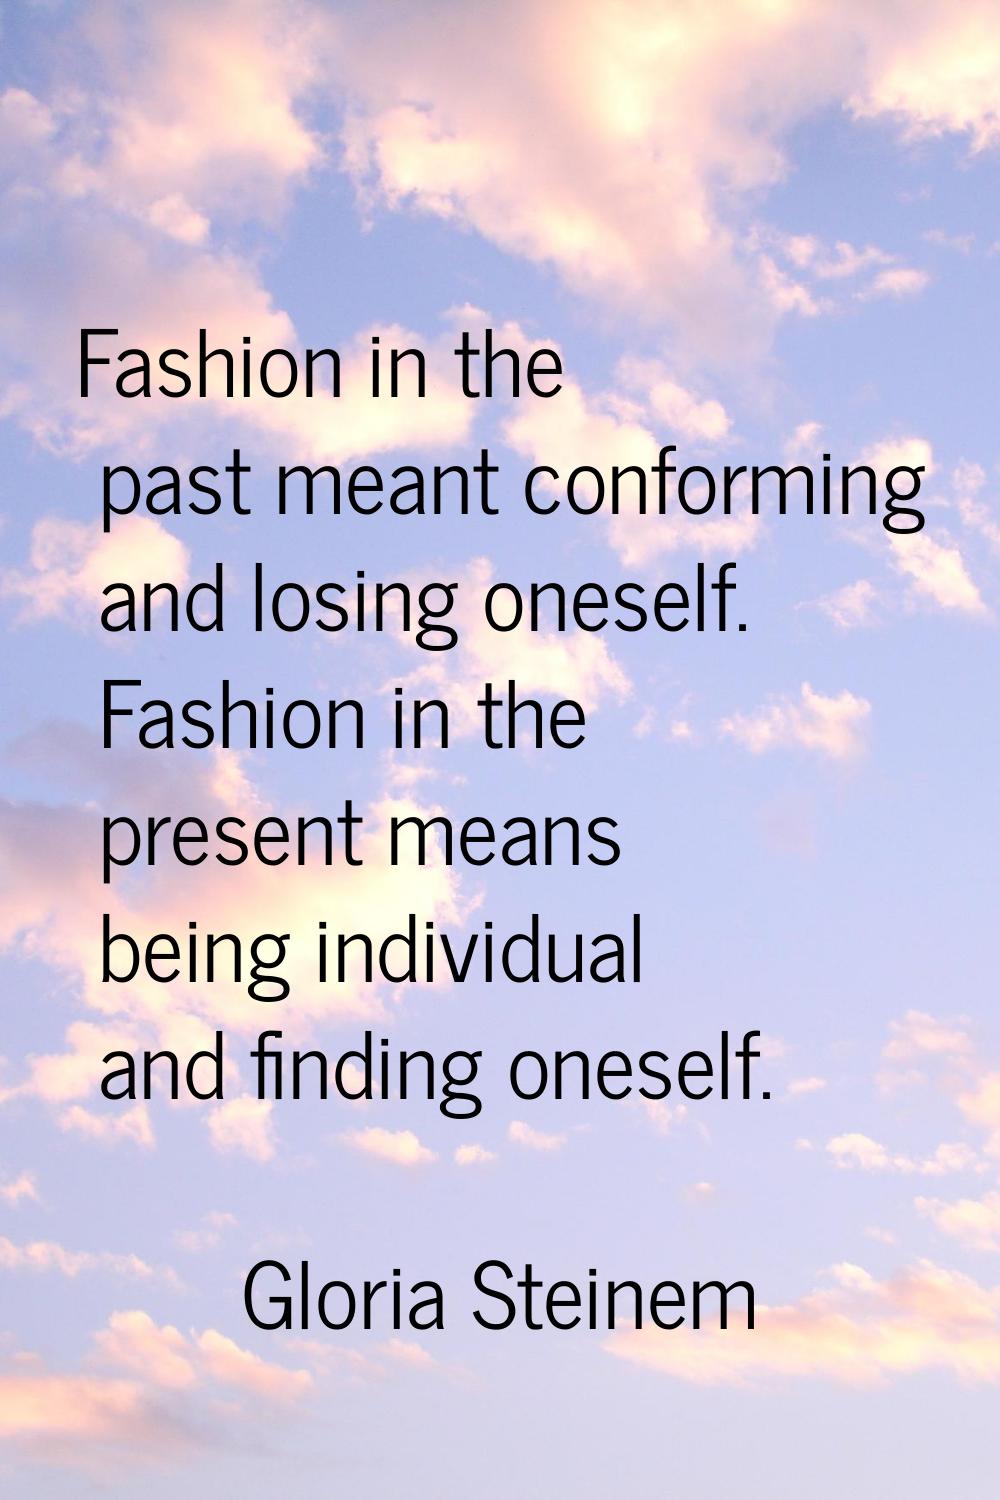 Fashion in the past meant conforming and losing oneself. Fashion in the present means being individ